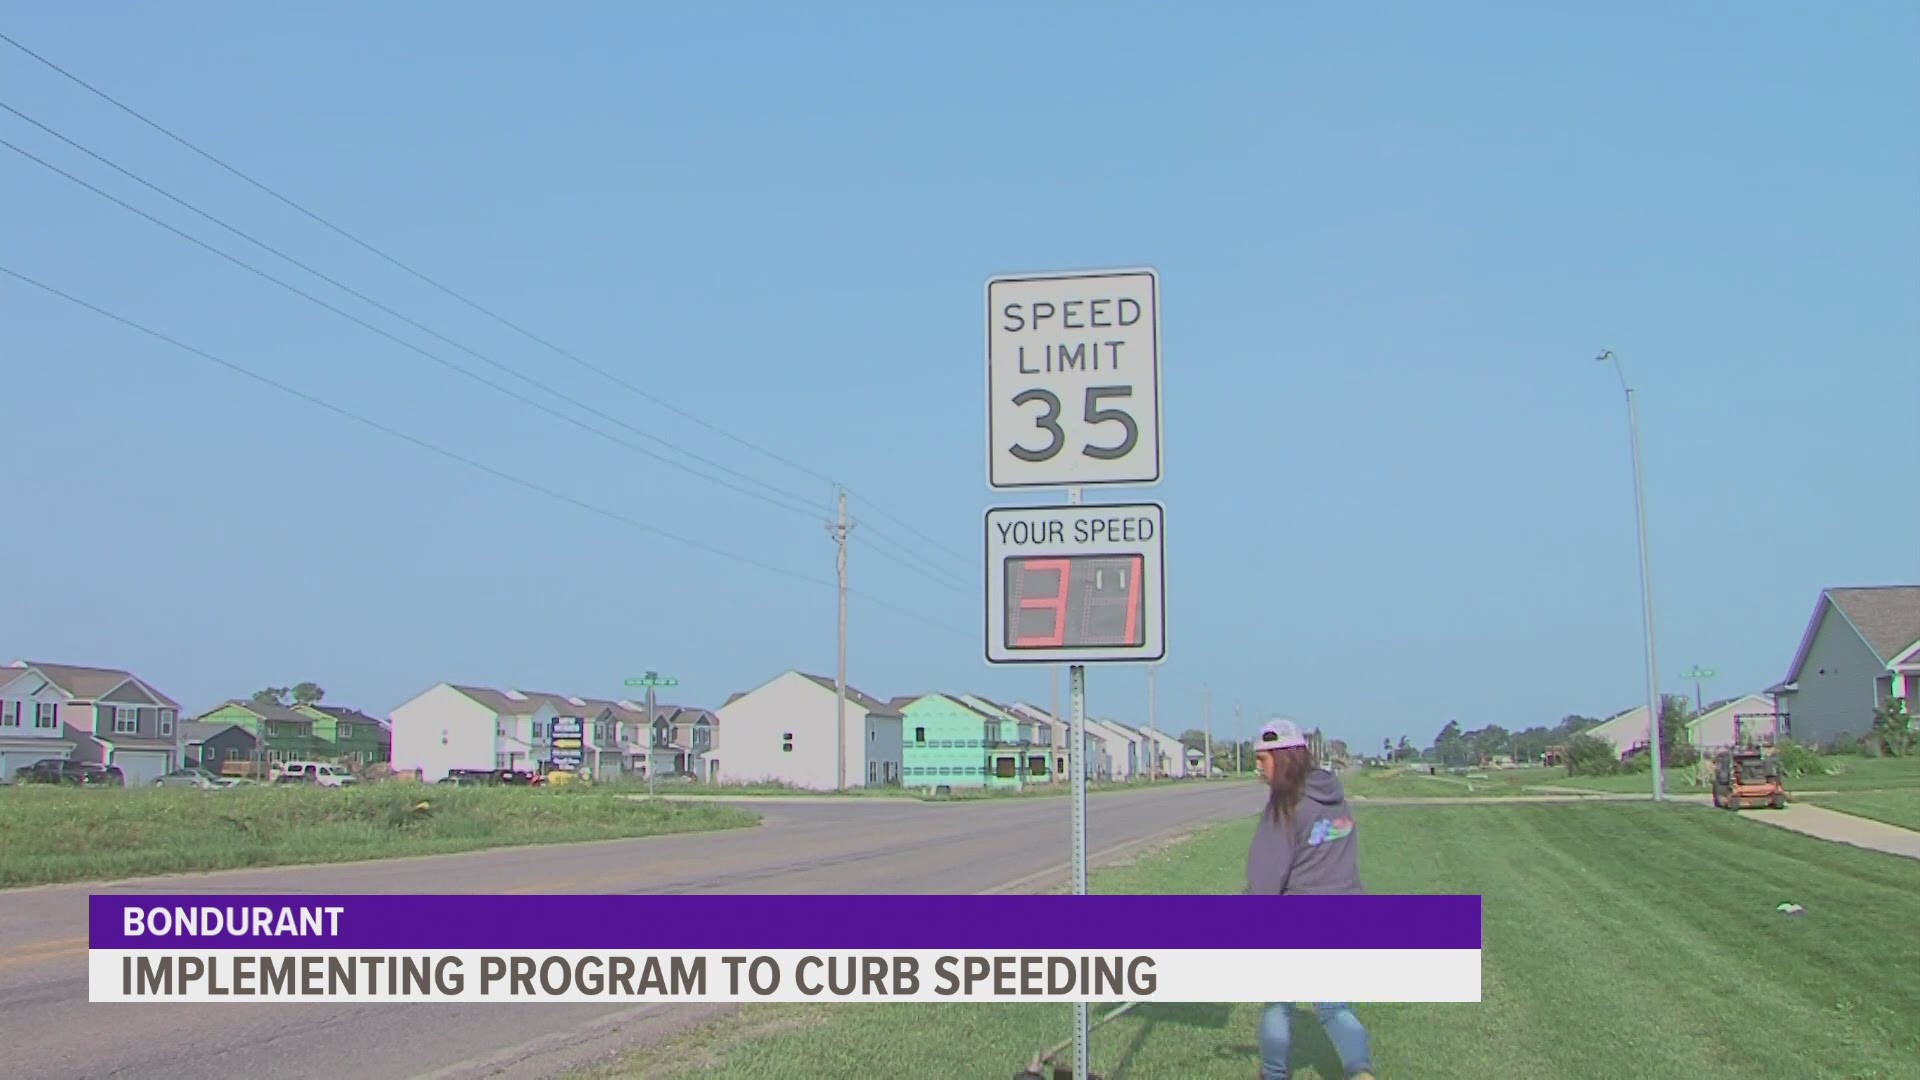 The City hopes to raise awareness of the dangers of speeding by placing signs that show how fast drivers are going.